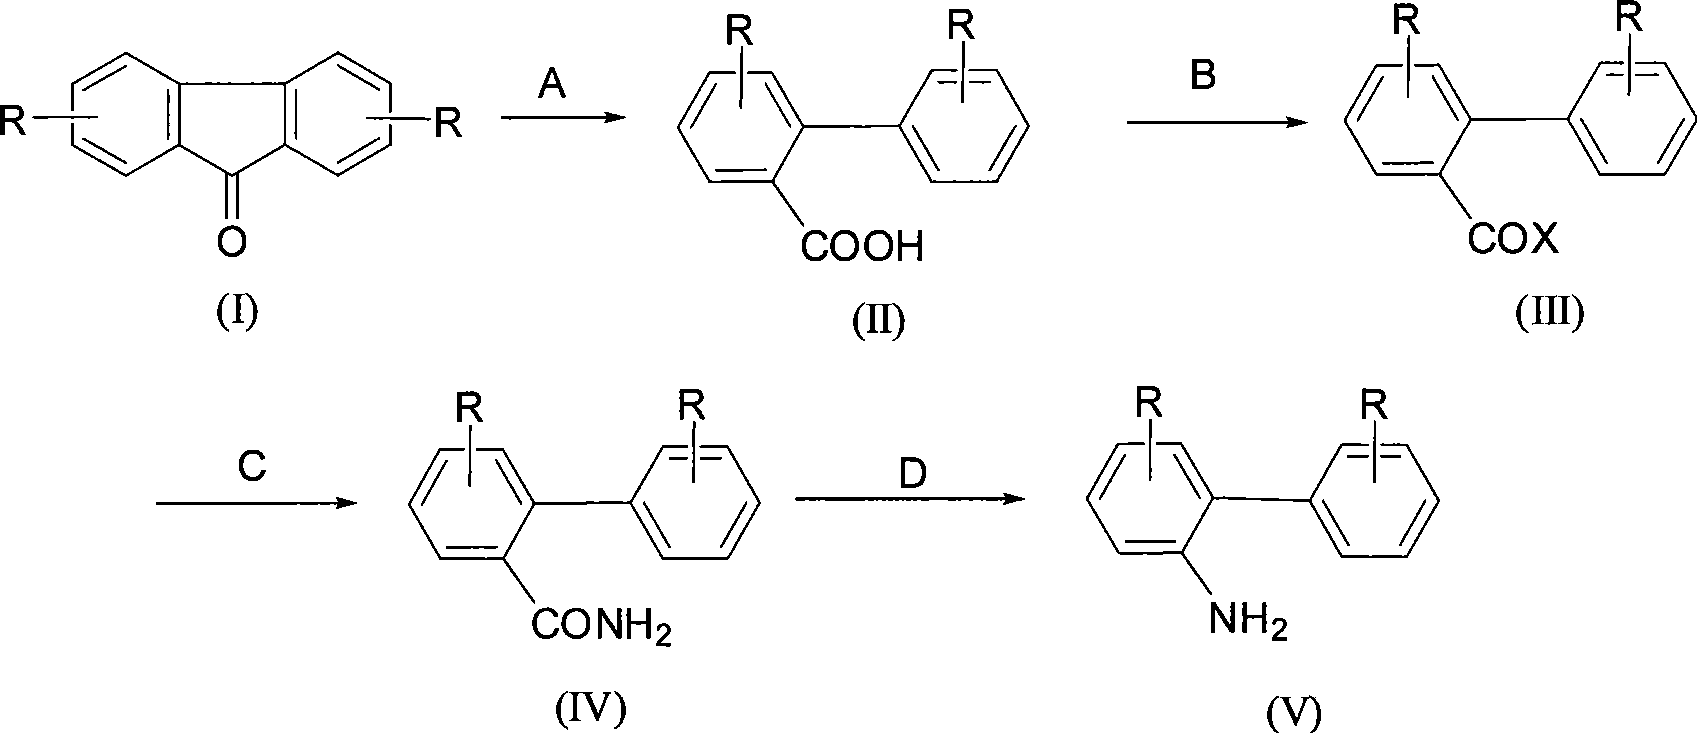 Synthesis of 2-aminobiphenyl compounds